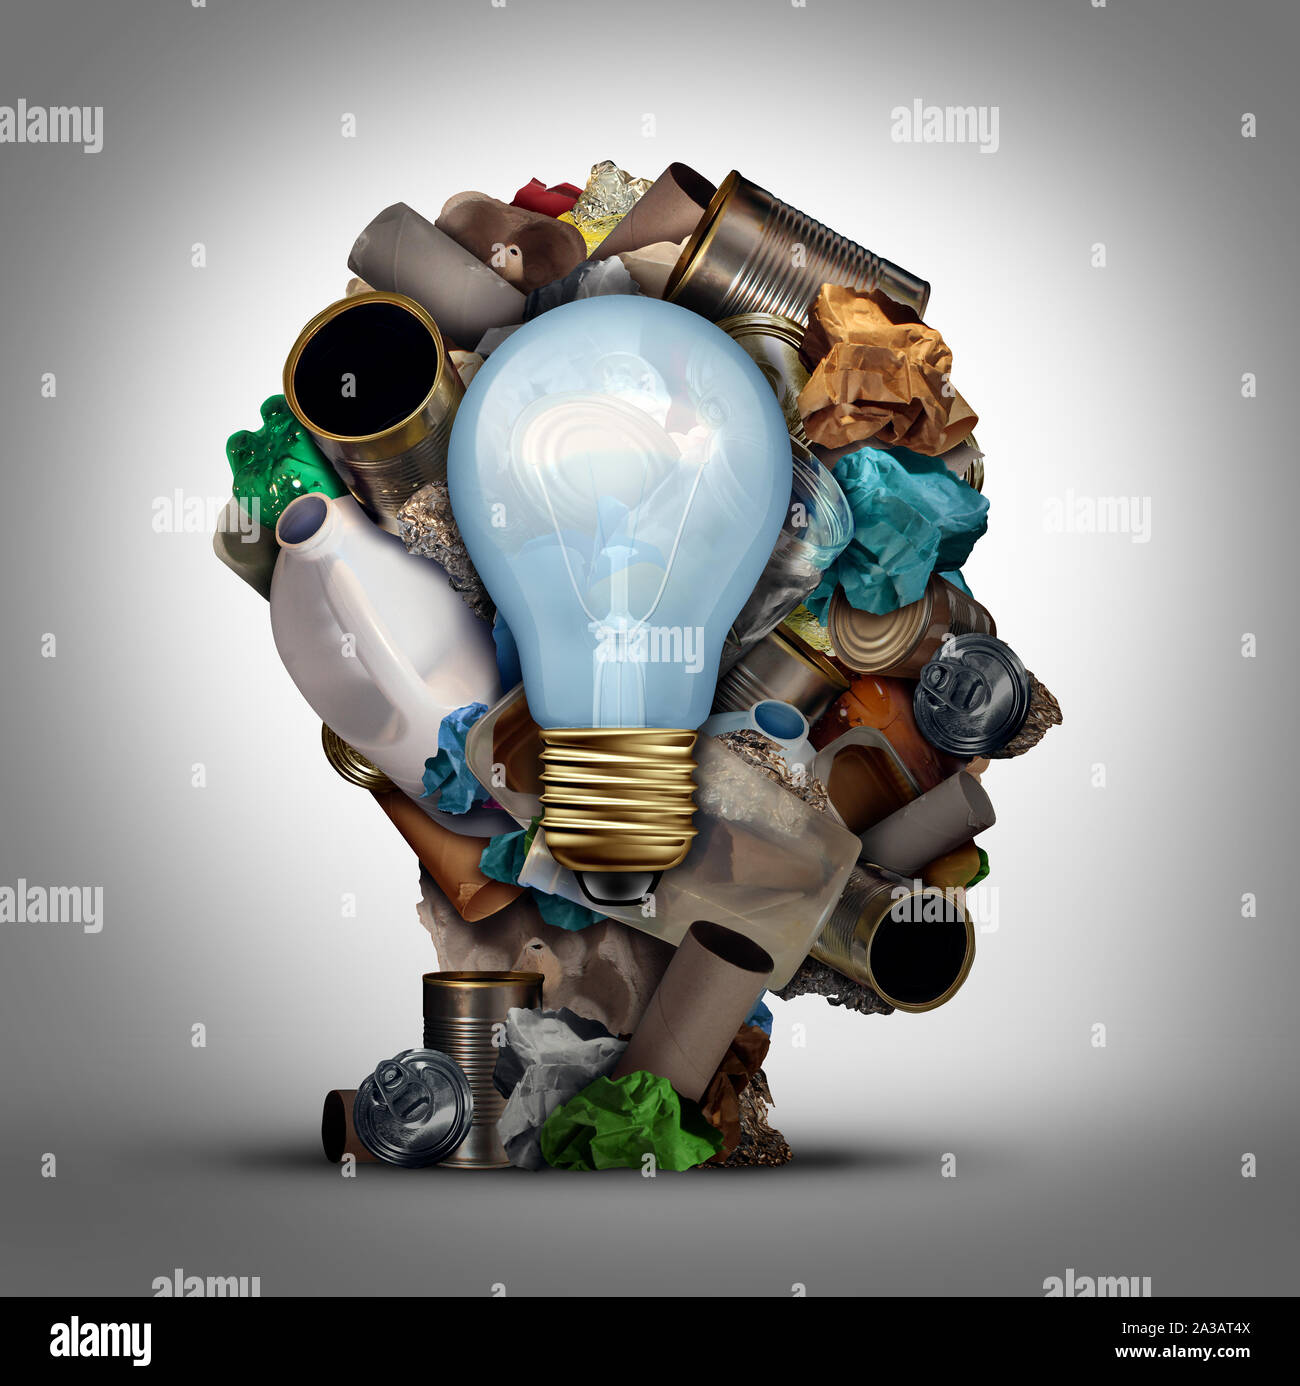 Recycling solution and environmental garbage management to reuse waste as paper glass metal and plastic bottles in a head shape as a symbol. Stock Photo